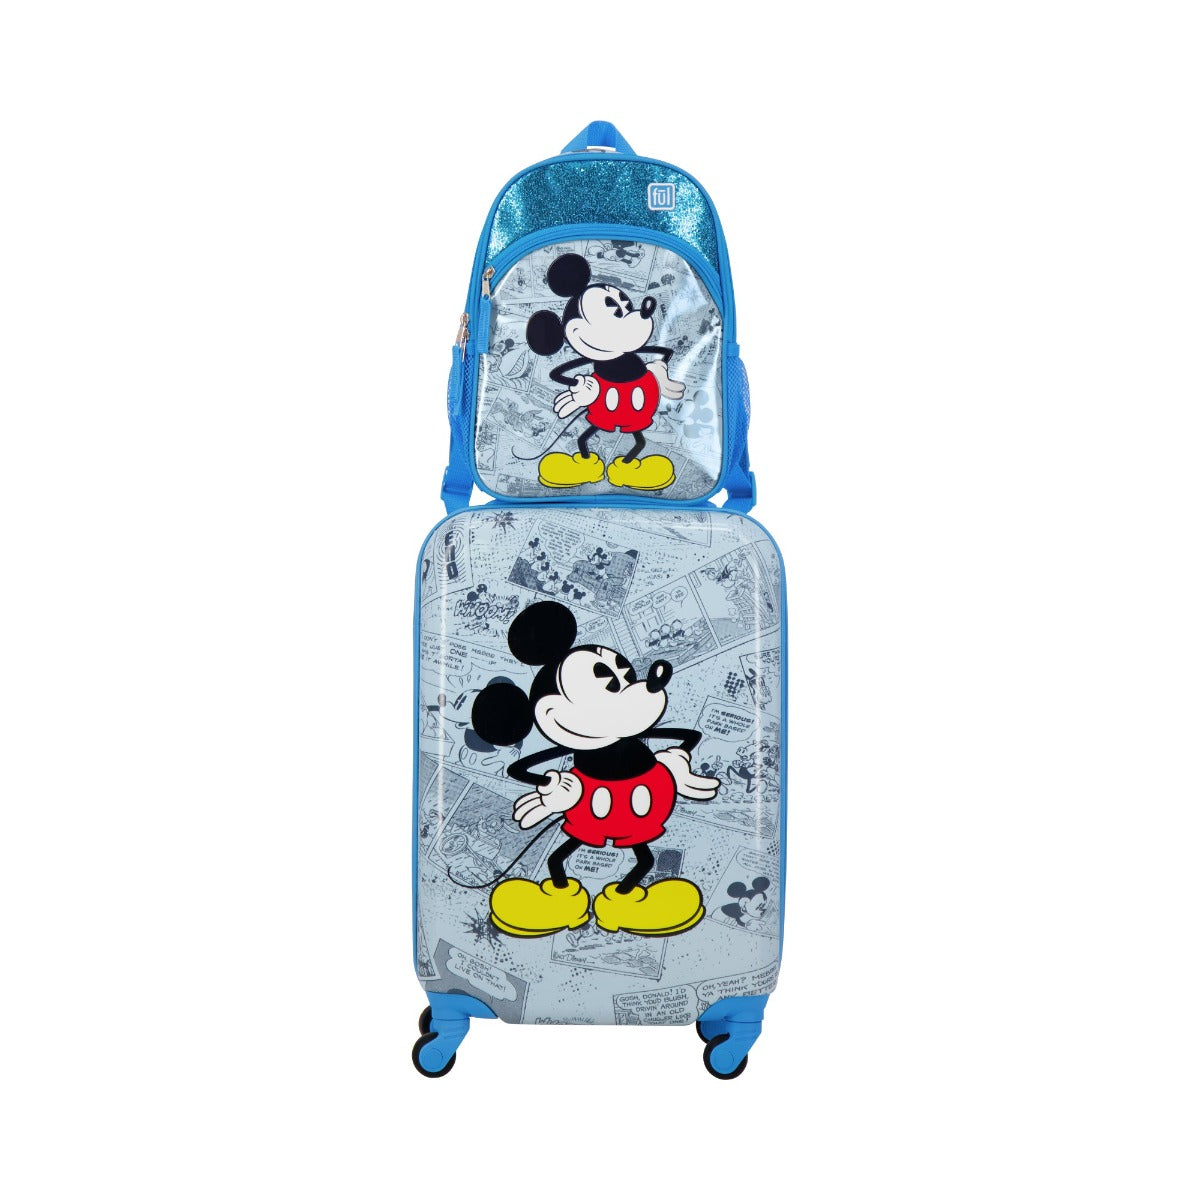 Blue Disney Heritage Mikey Mouse matching 2 piece set with suitcase and backpack for kids